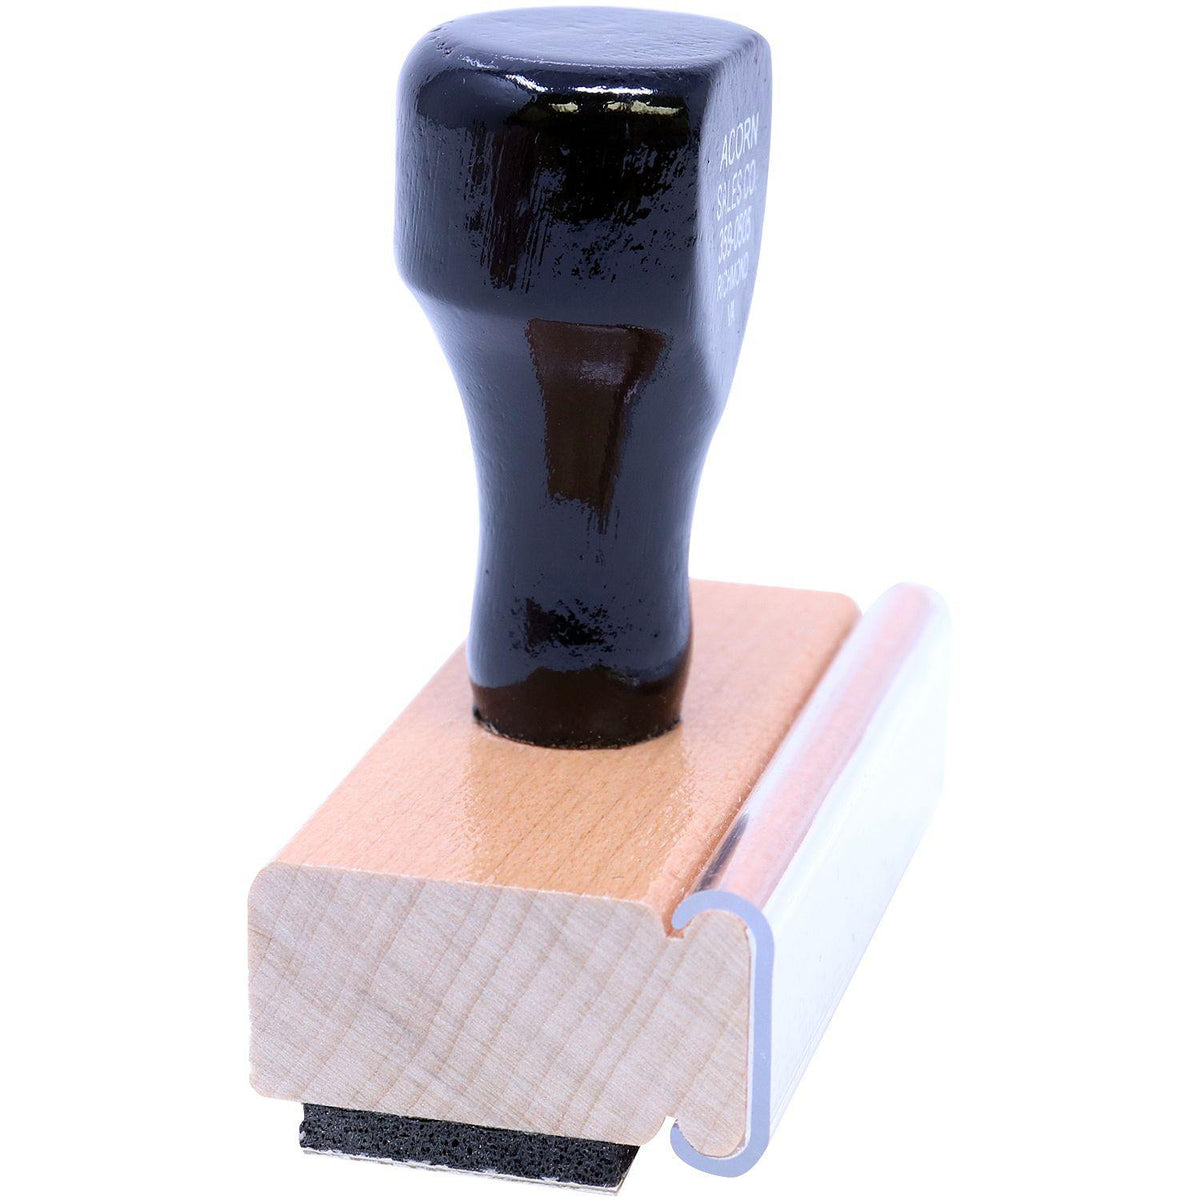 Side View of Large Due Date Rubber Stamp at an Angle